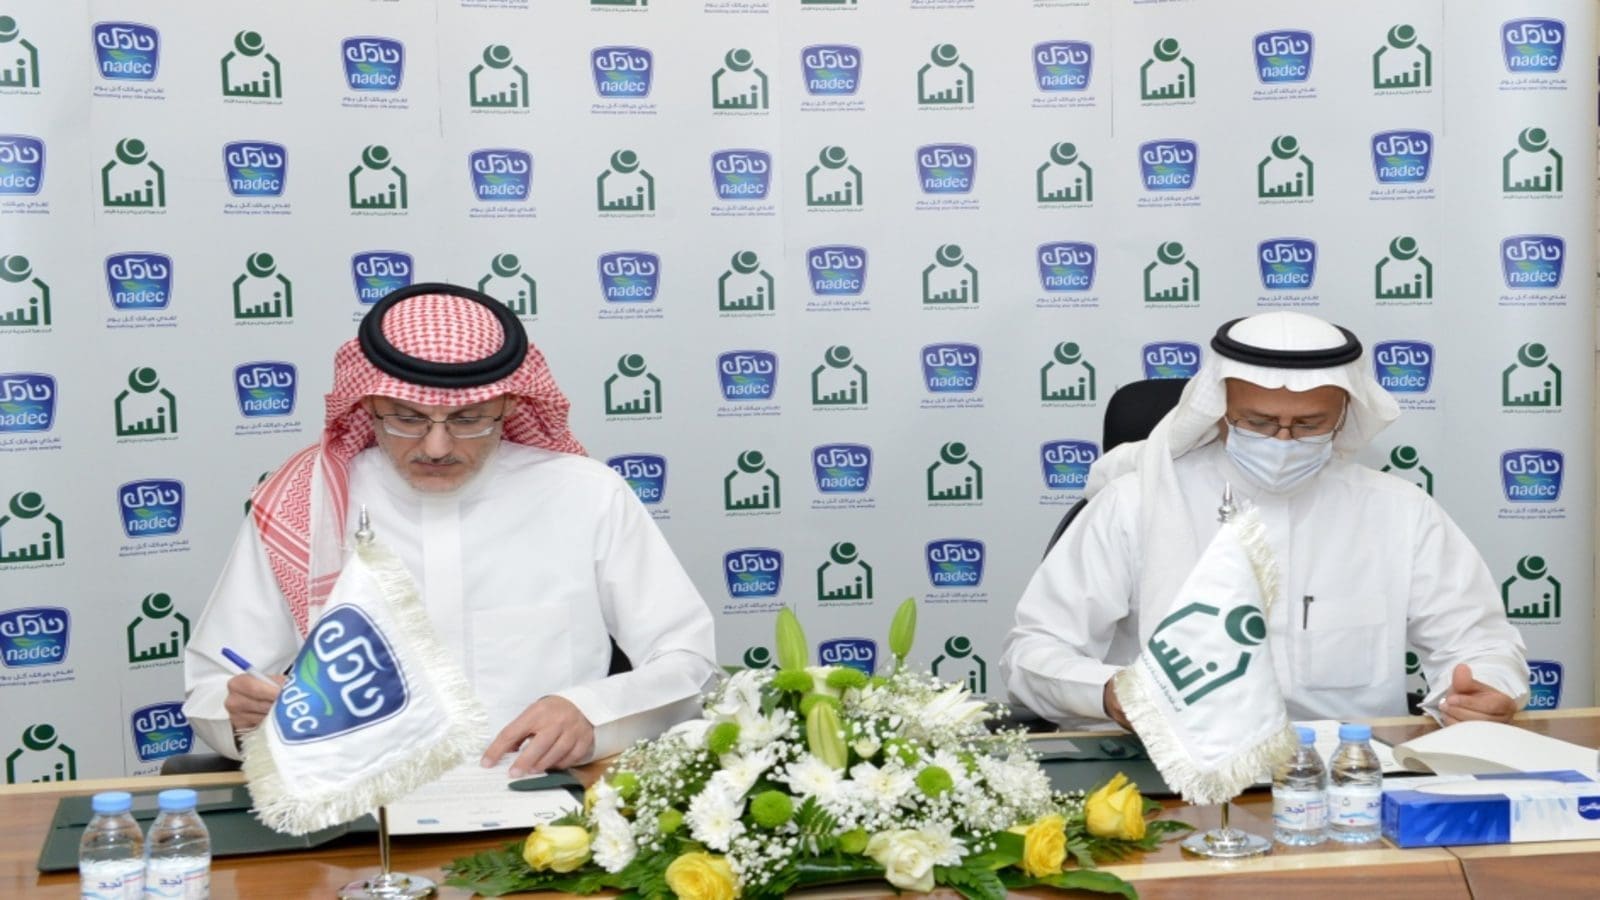 Saudi’s Nadec signs pacts to aid its ambition of becoming US$1.59bn vertically integrated food business